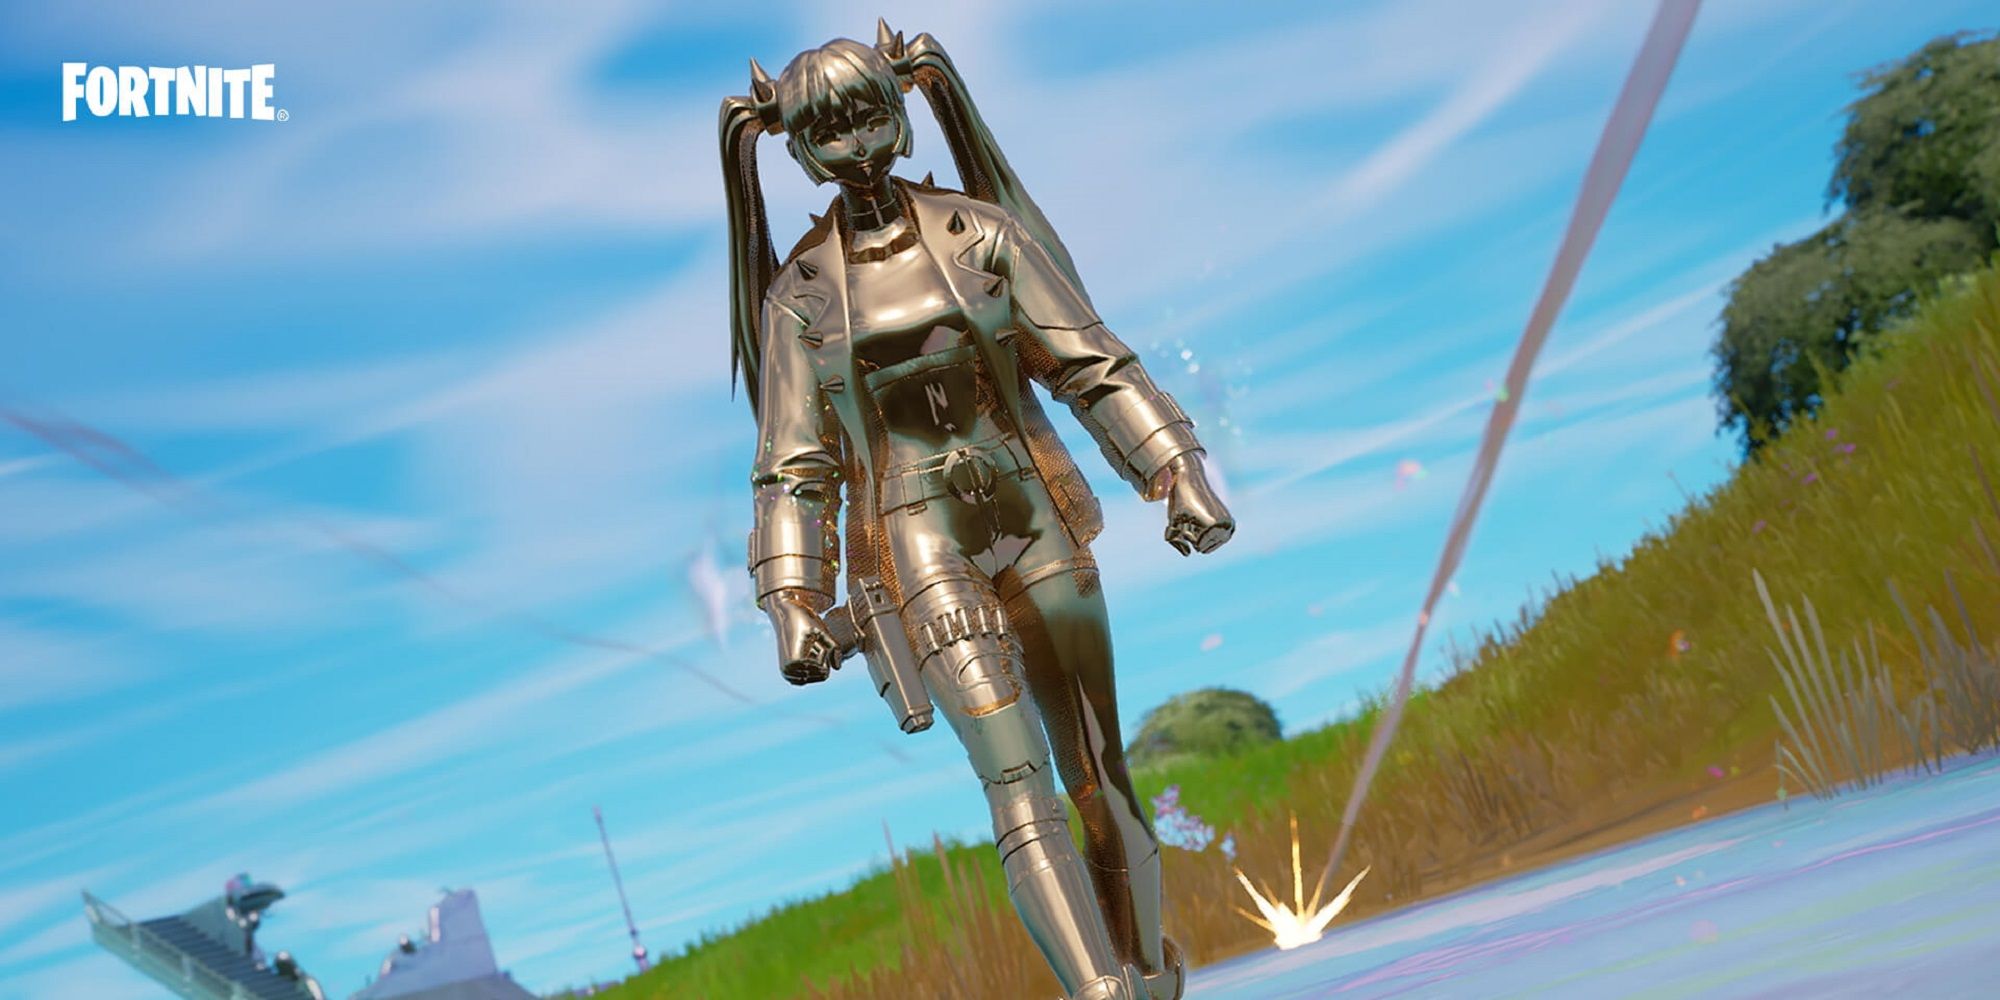 Fortnite official image showing Chrome!